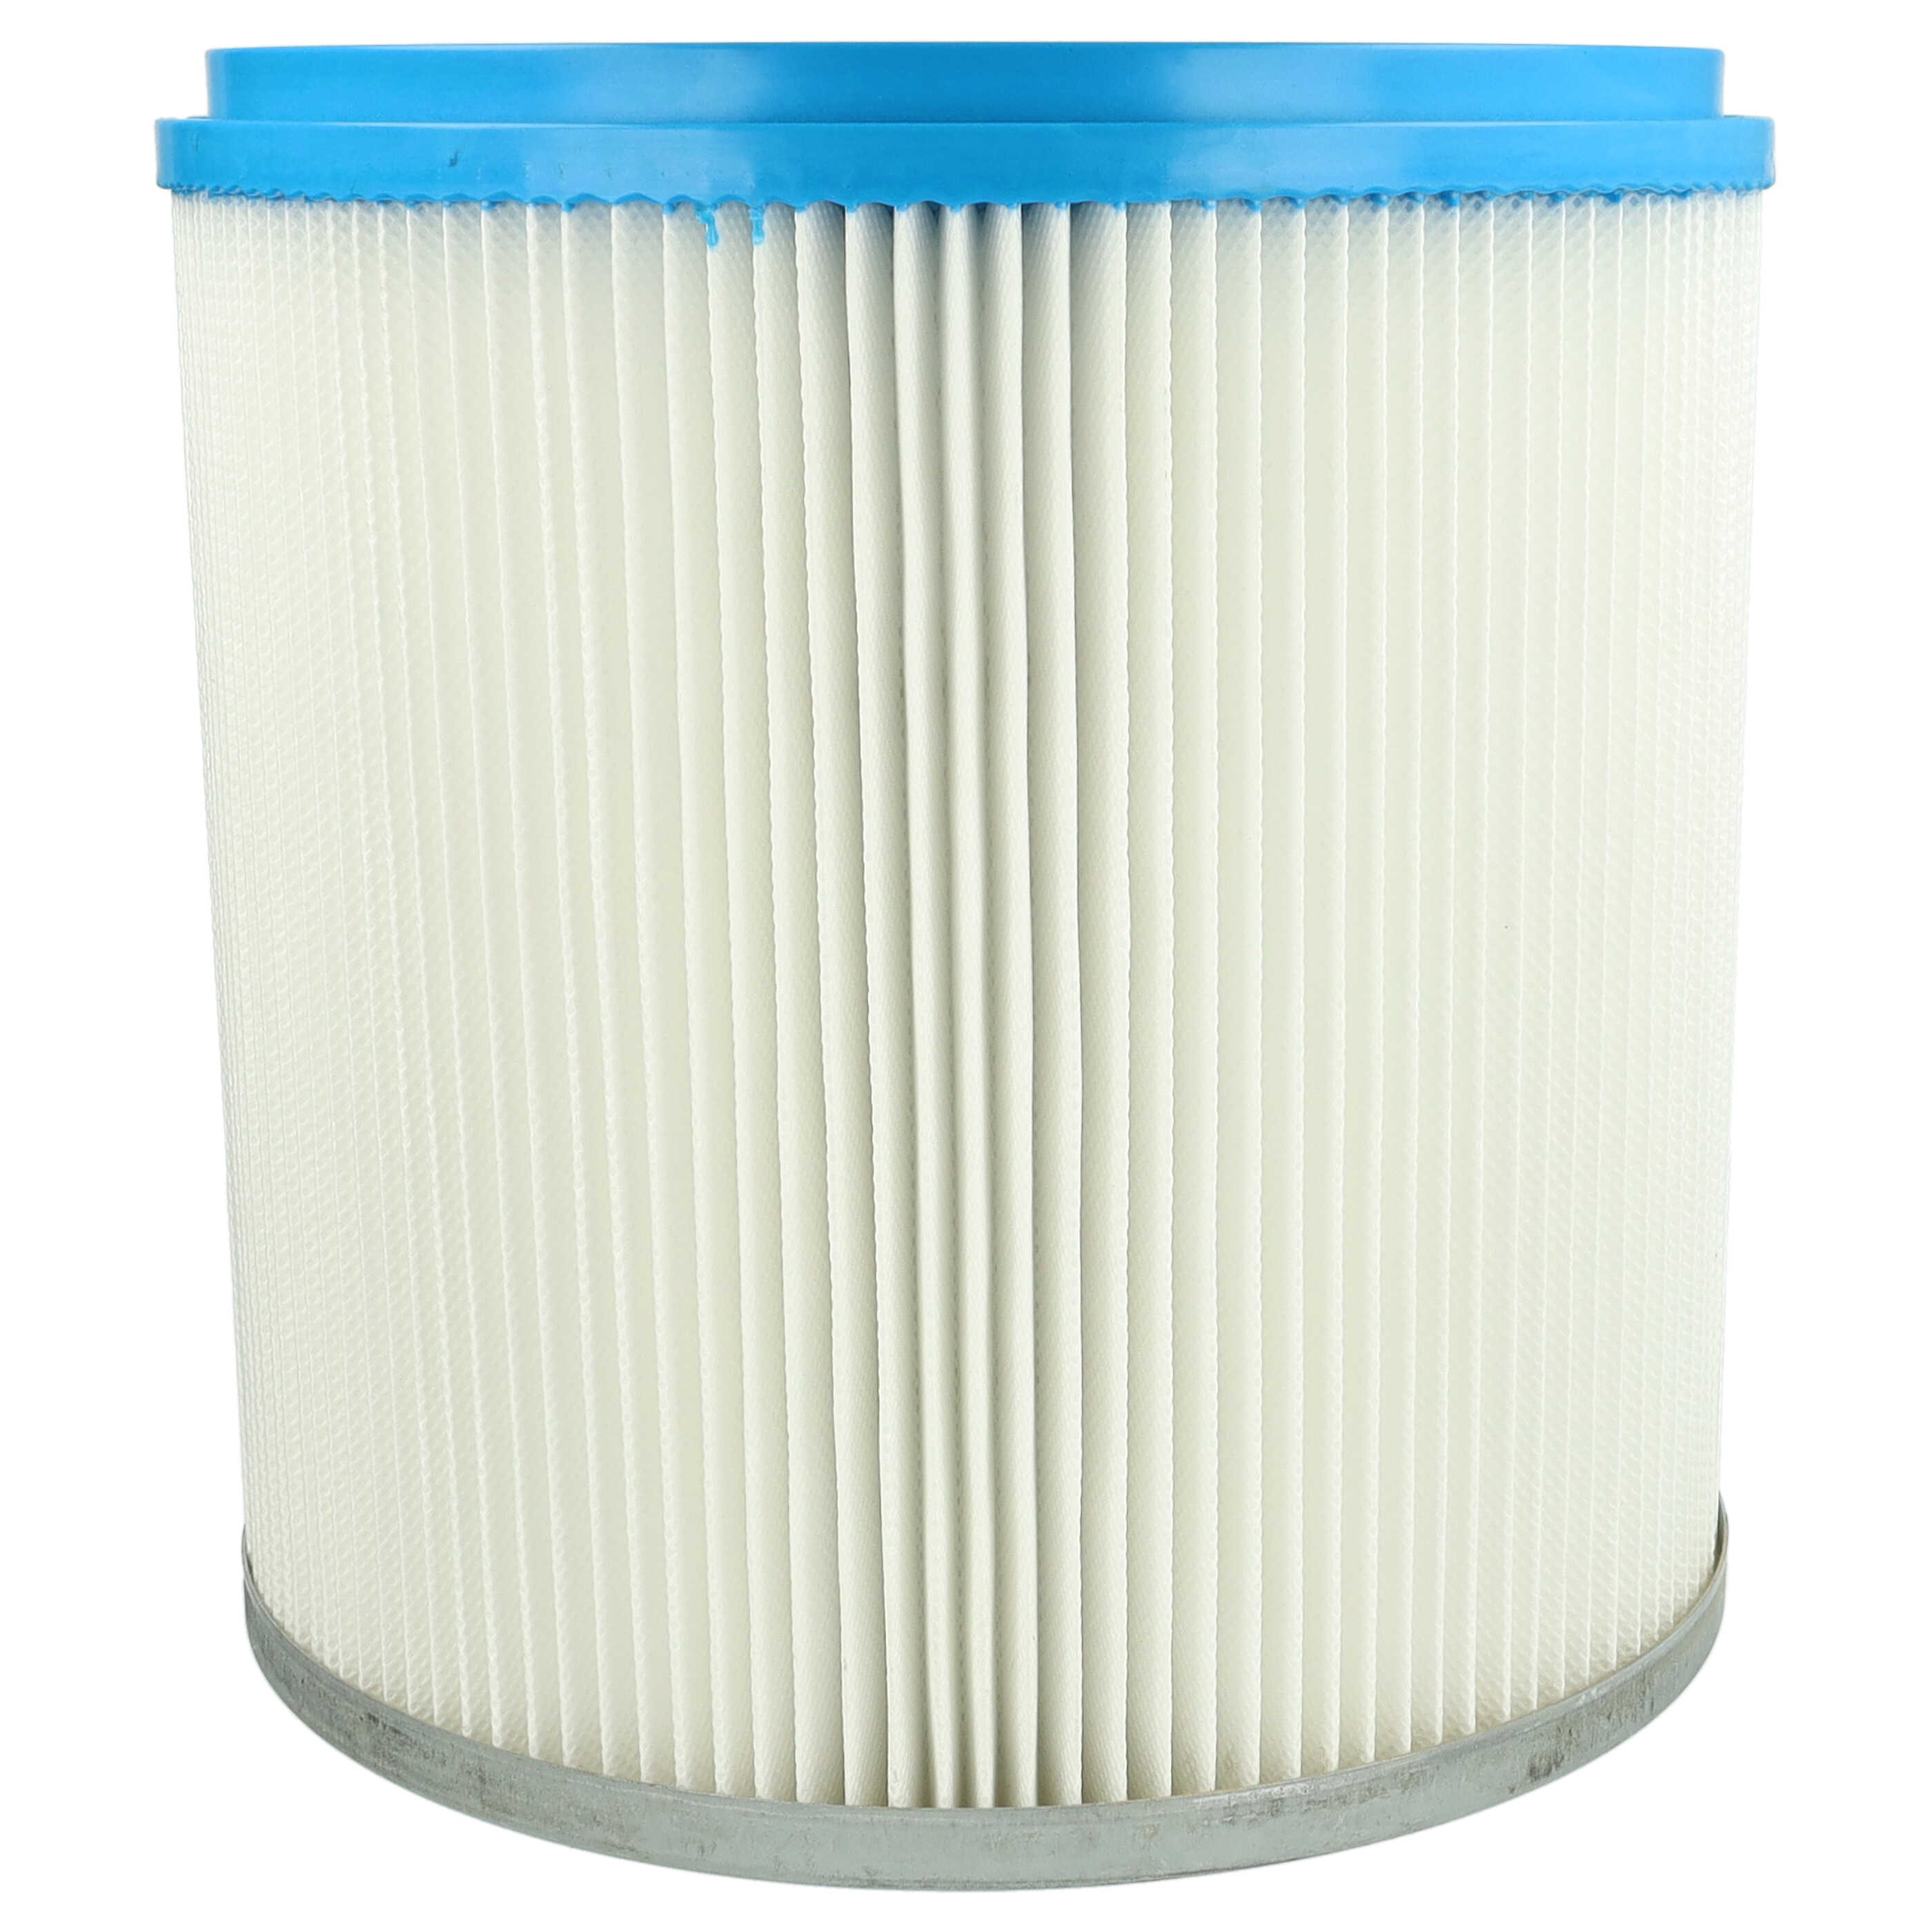 1x cartridge filter replaces Bosch 2607432008 for BoschVacuum Cleaner, white / silver / blue